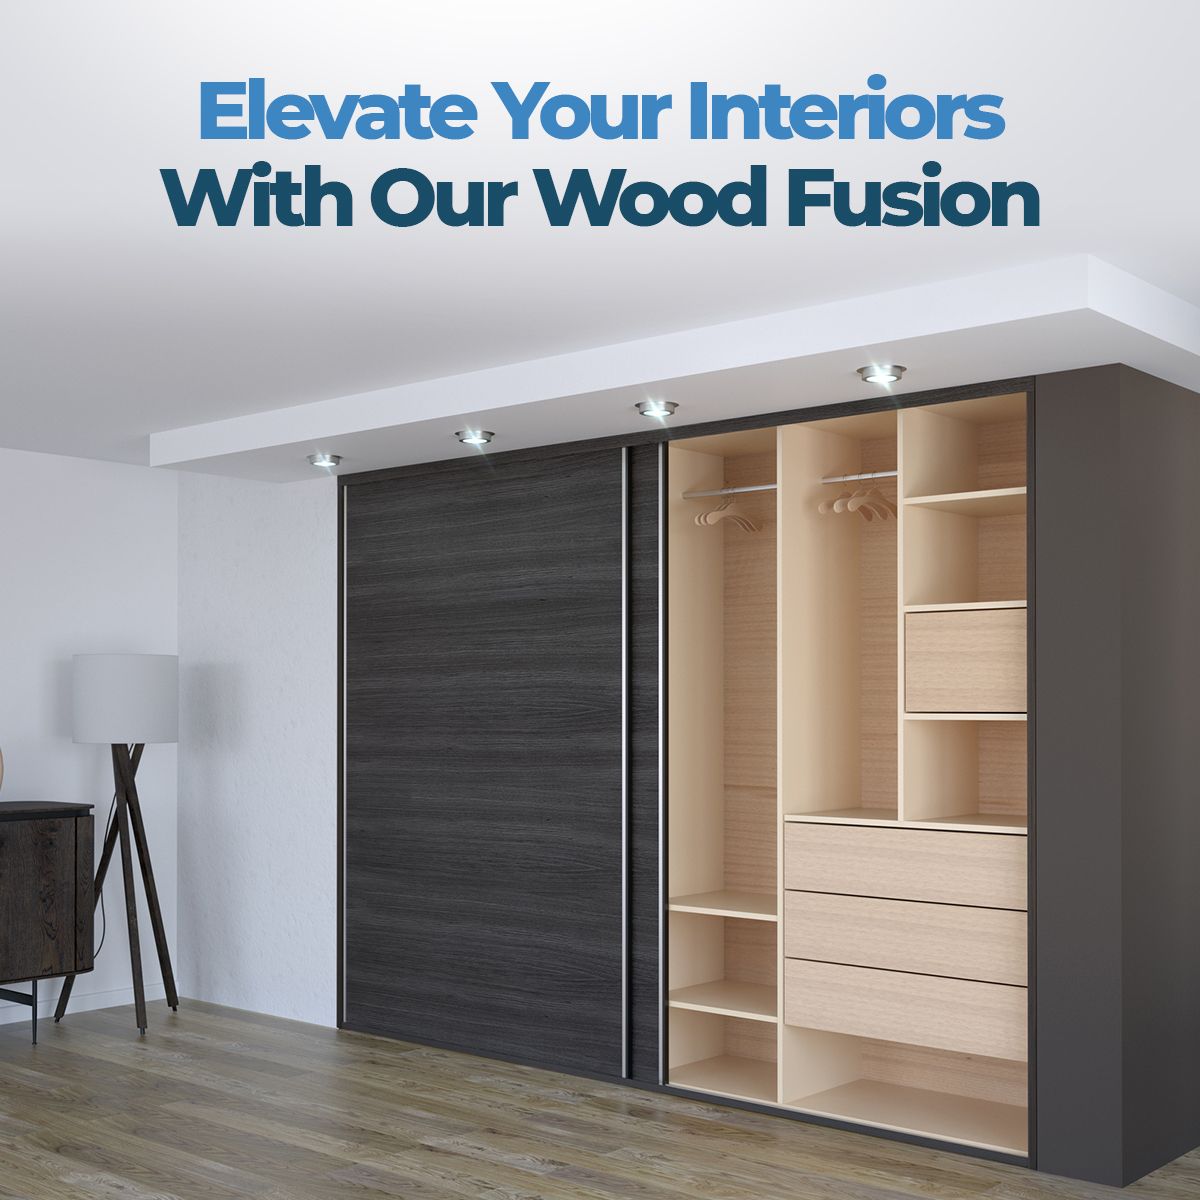 Elevate Your Interiors With Our Wood Fusion